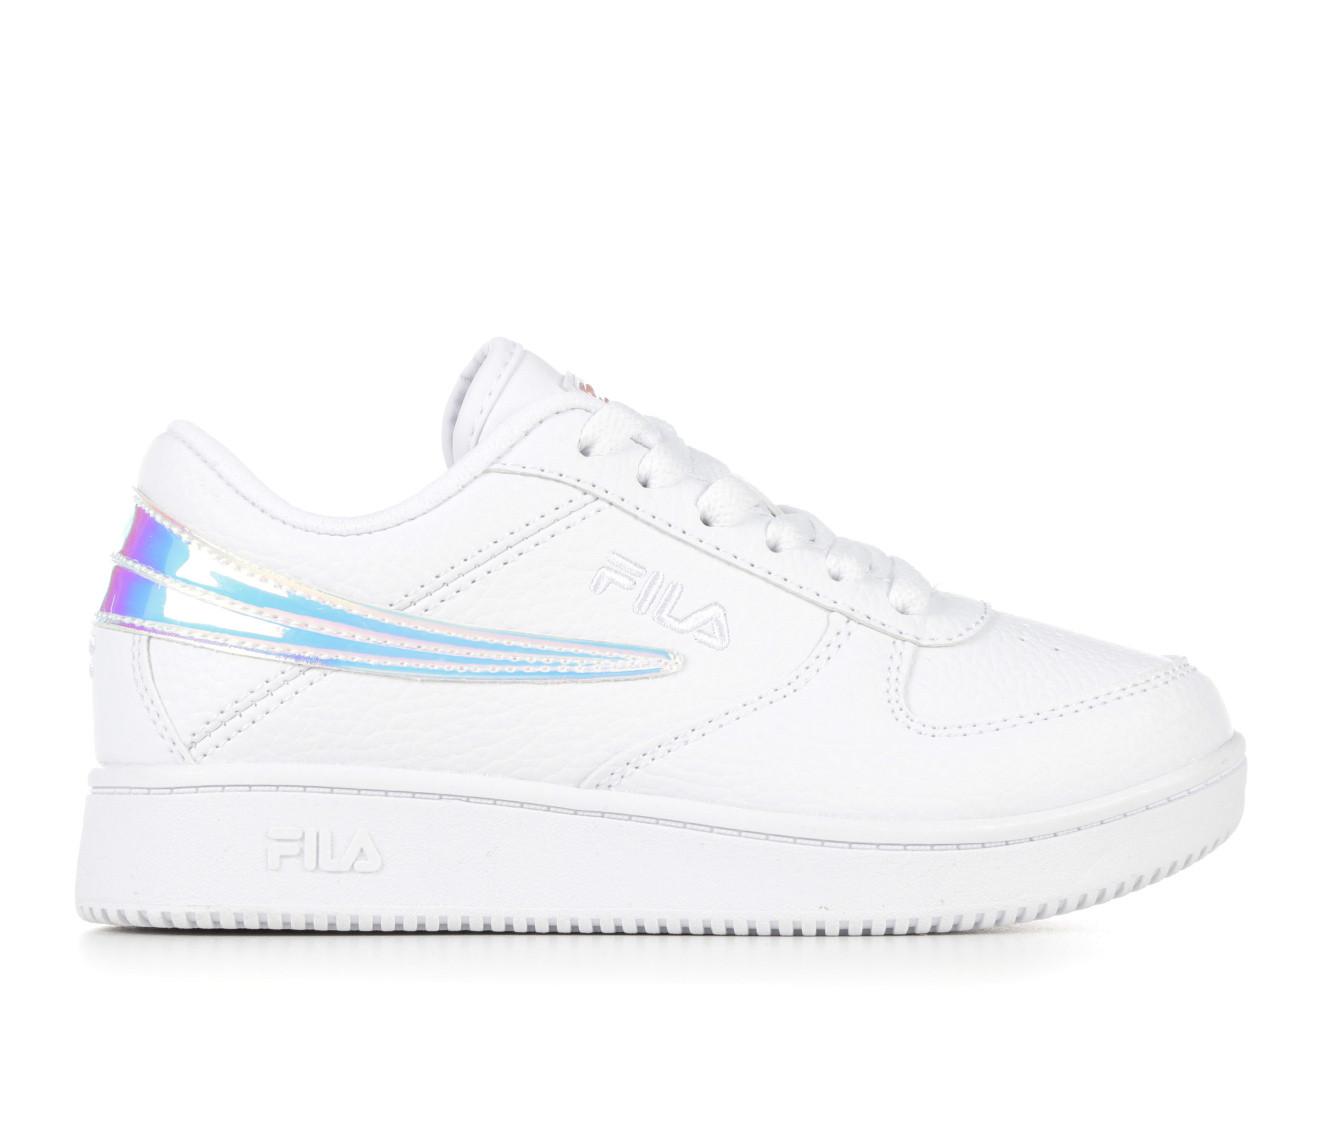 Girls' Fila A-Low Iridescent 10.5-7 Sneakers